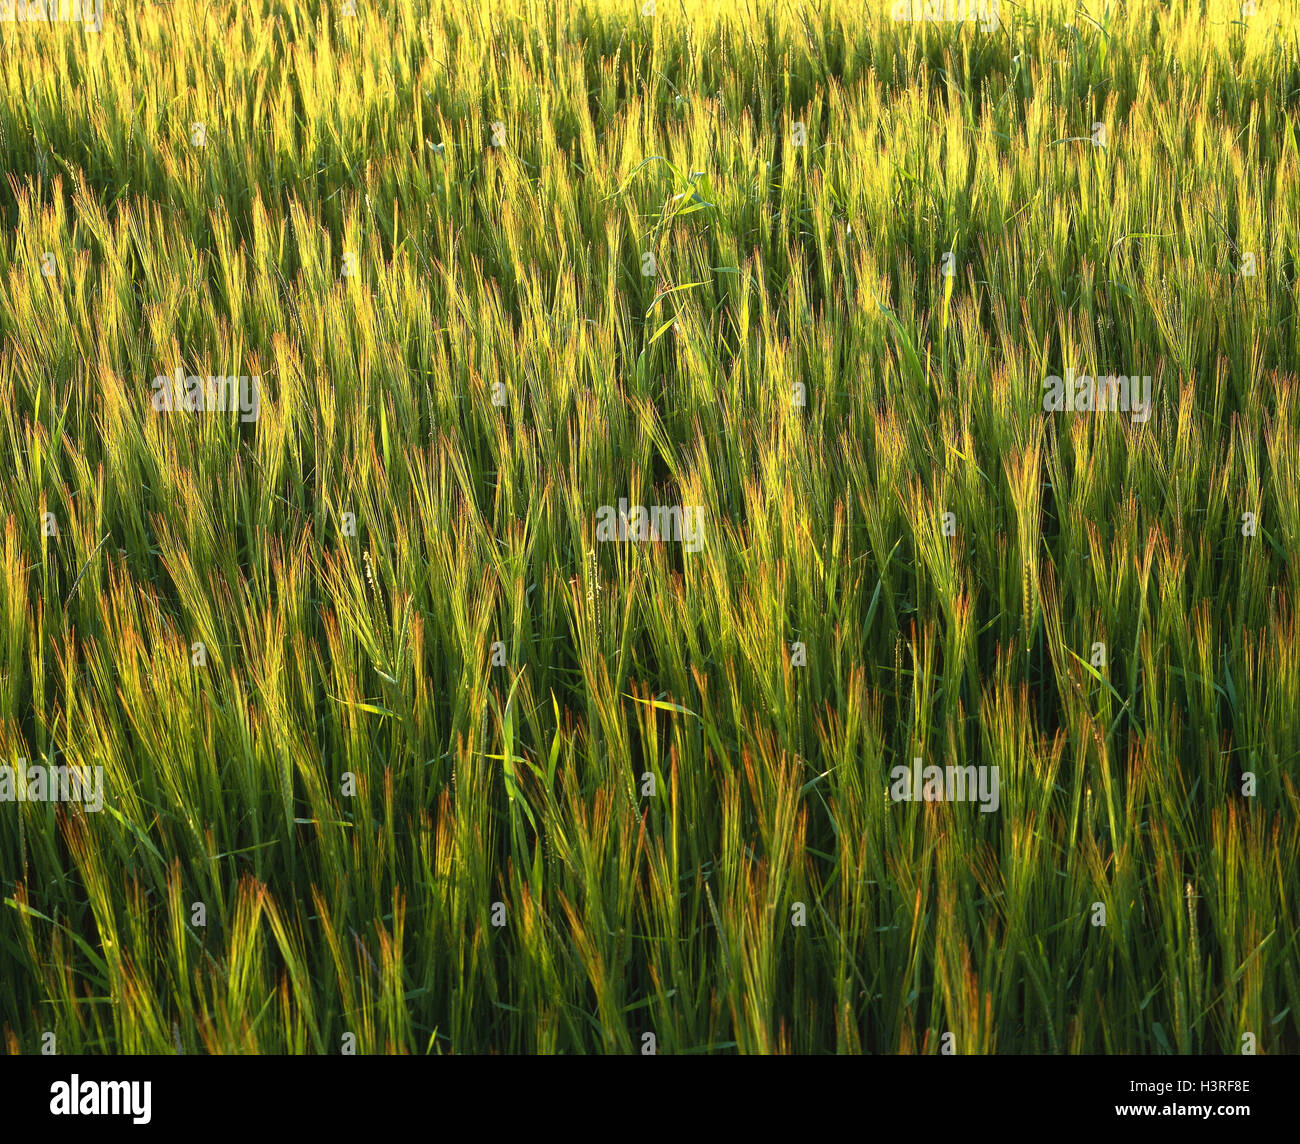 Grain-field, agriculture, agriculturally, field, cultivation, wheat cultivation, grain, wheat, growing grain, useful plants, plants, green, summer, outside, Stock Photo